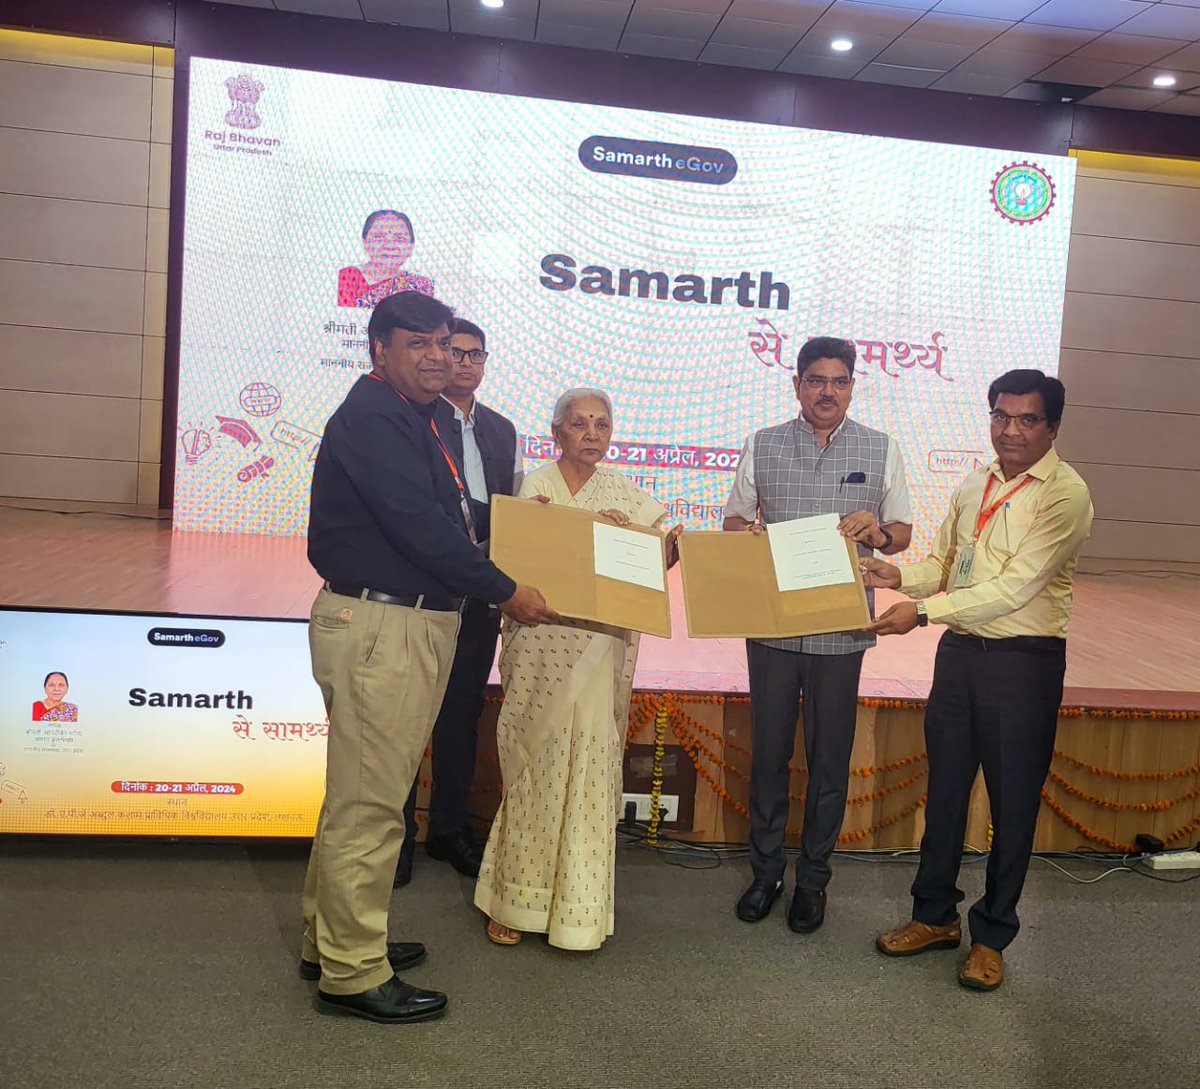 Signed MoU with SAMARTH for implementation of ERP at University of Lucknow as an outcome of two days workshop on 'SAMARTH से सामर्थ्य'